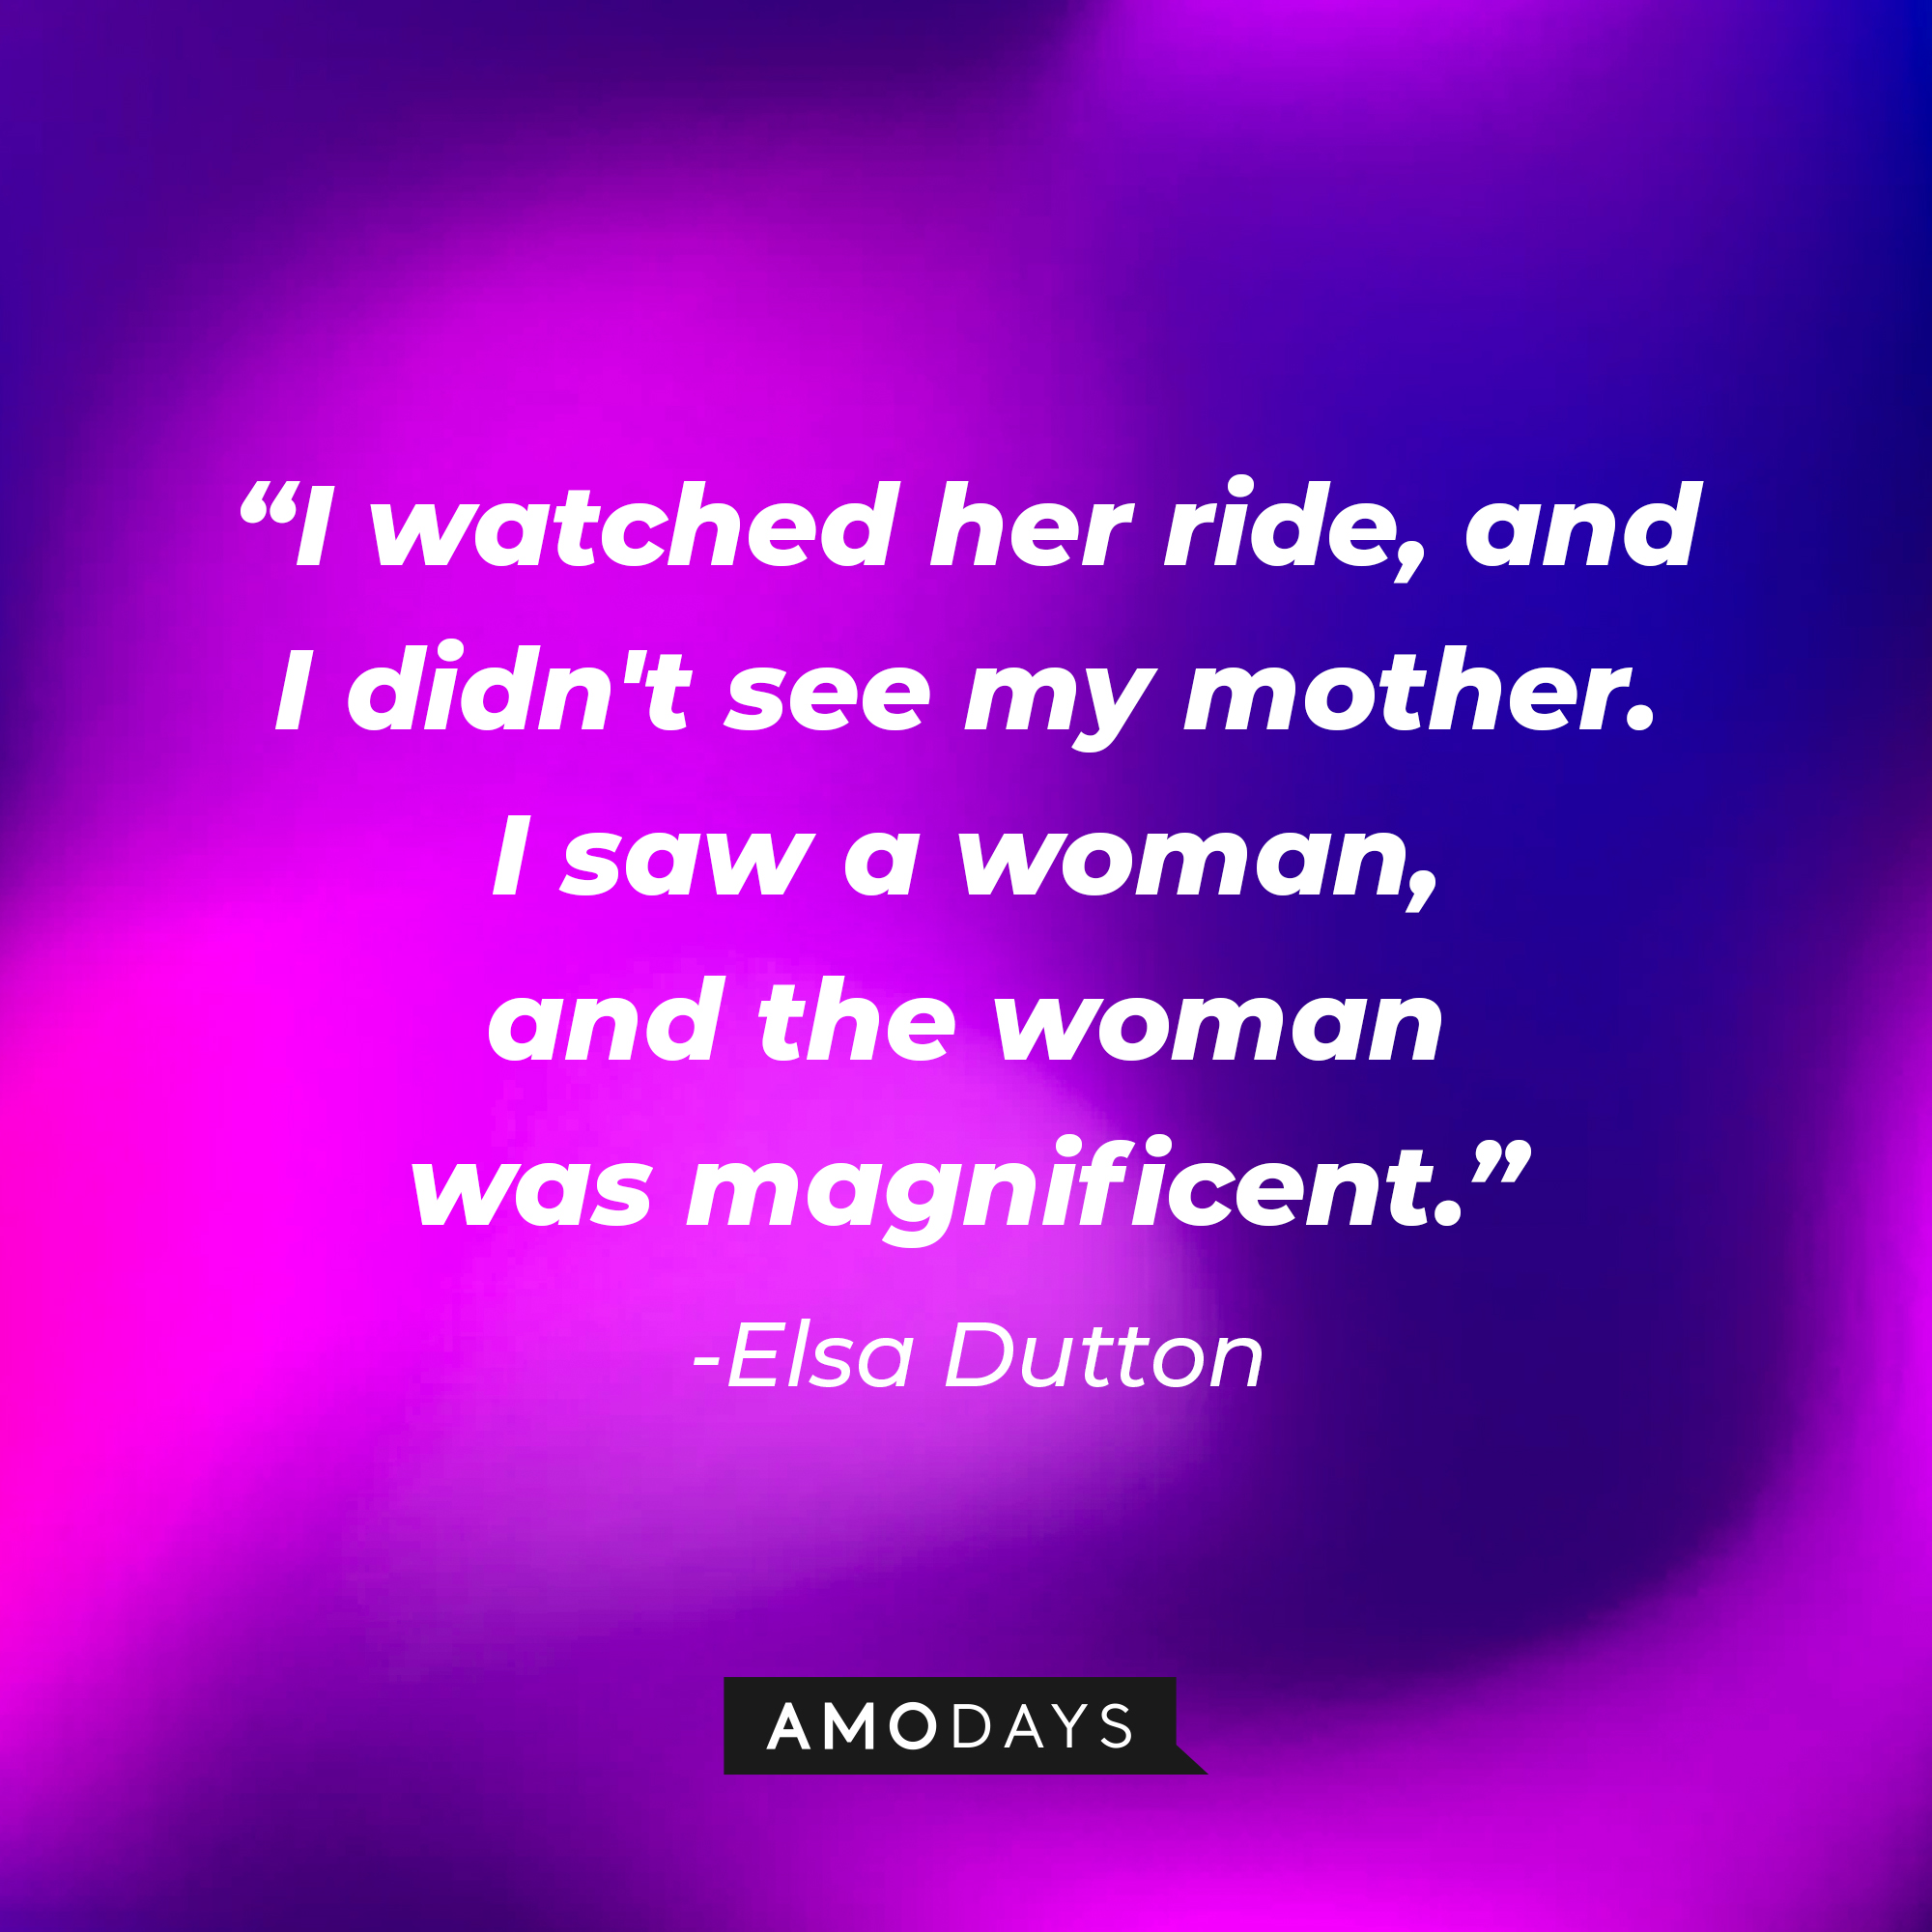 Elsa Dutton's quote: "I watched her ride, and I didn't see my mother. I saw a woman, and the woman was magnificent." | Source: AmoDays